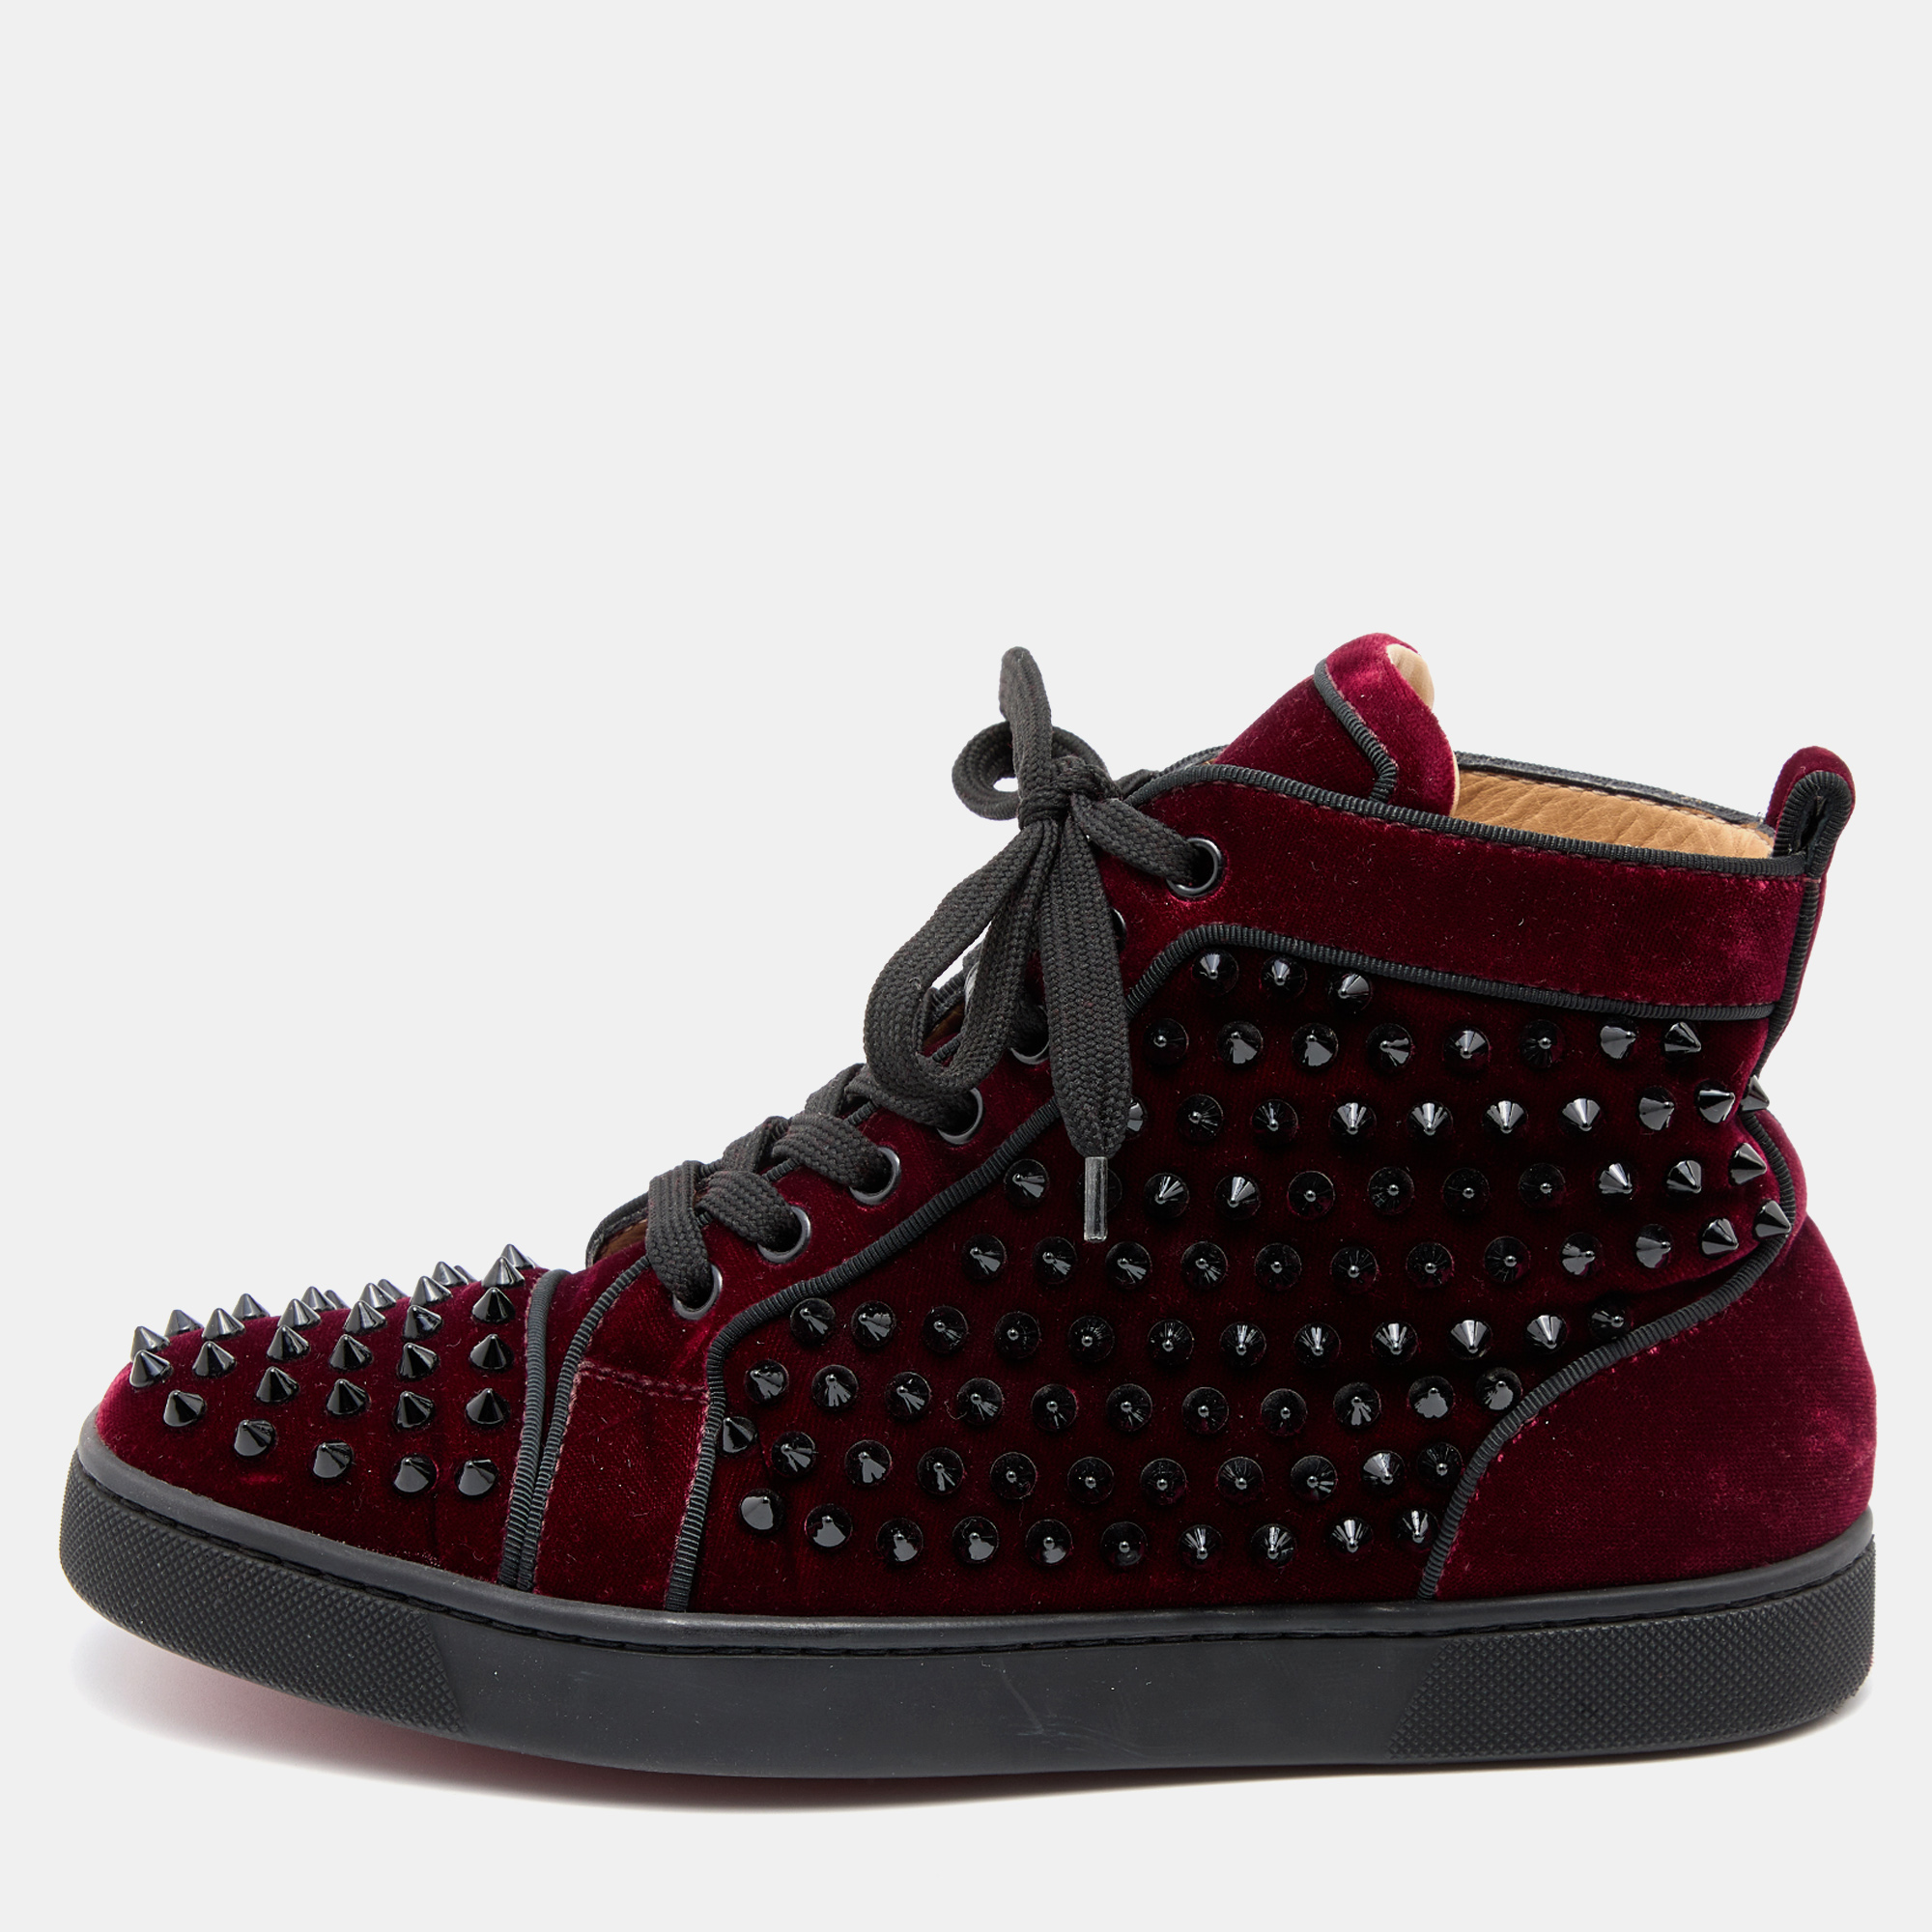 Pre-owned Christian Louboutin Burgundy Velvet Louis Junior Spikes High Top Sneakers Size 39.5